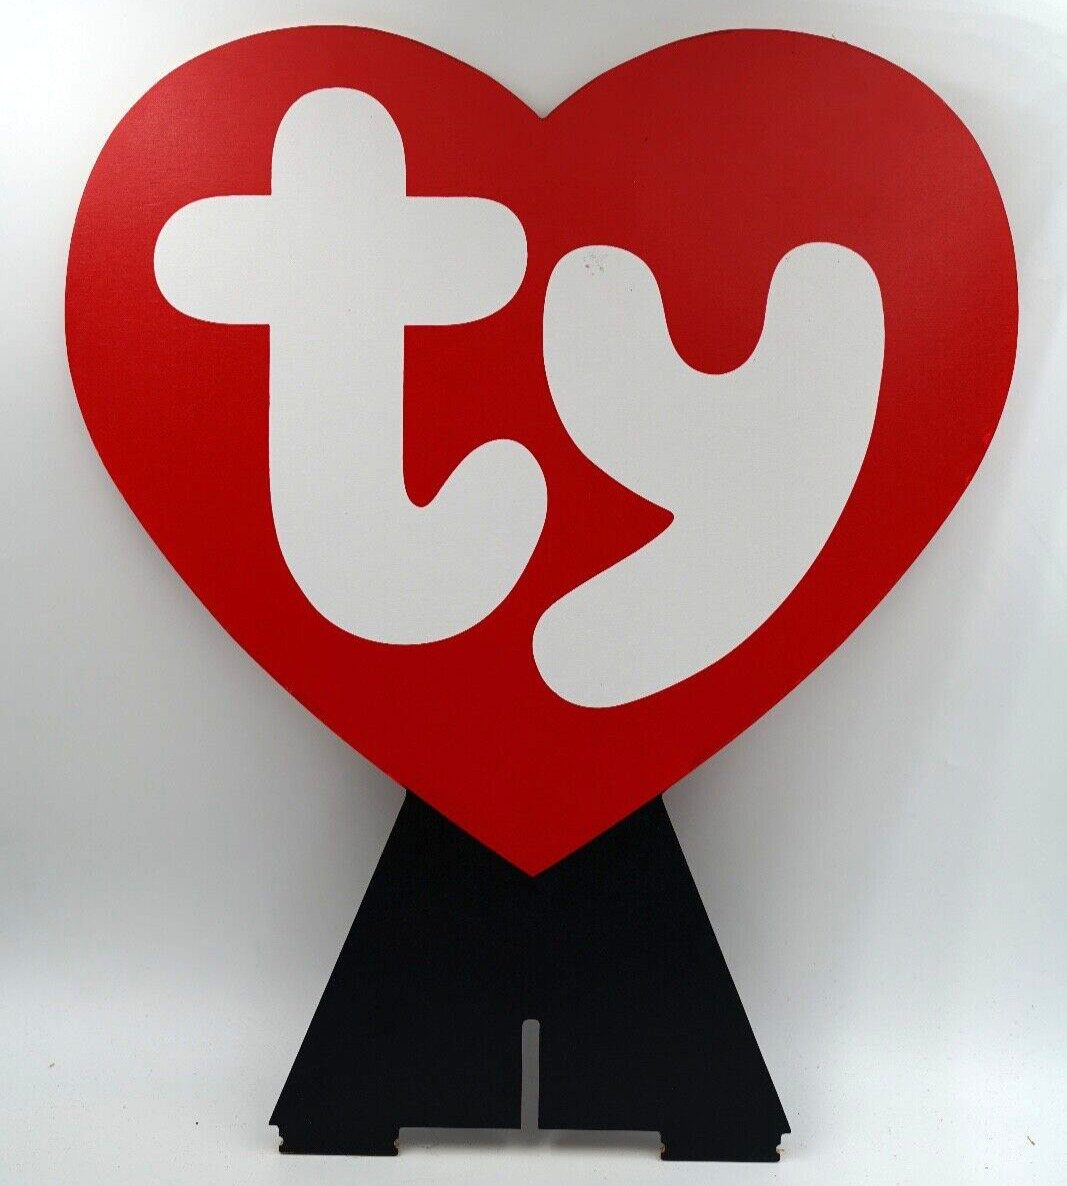 RARE TY BEANIE BABIES LARGE HEART SHAPED STORE DISPLAY SIGN 18.5